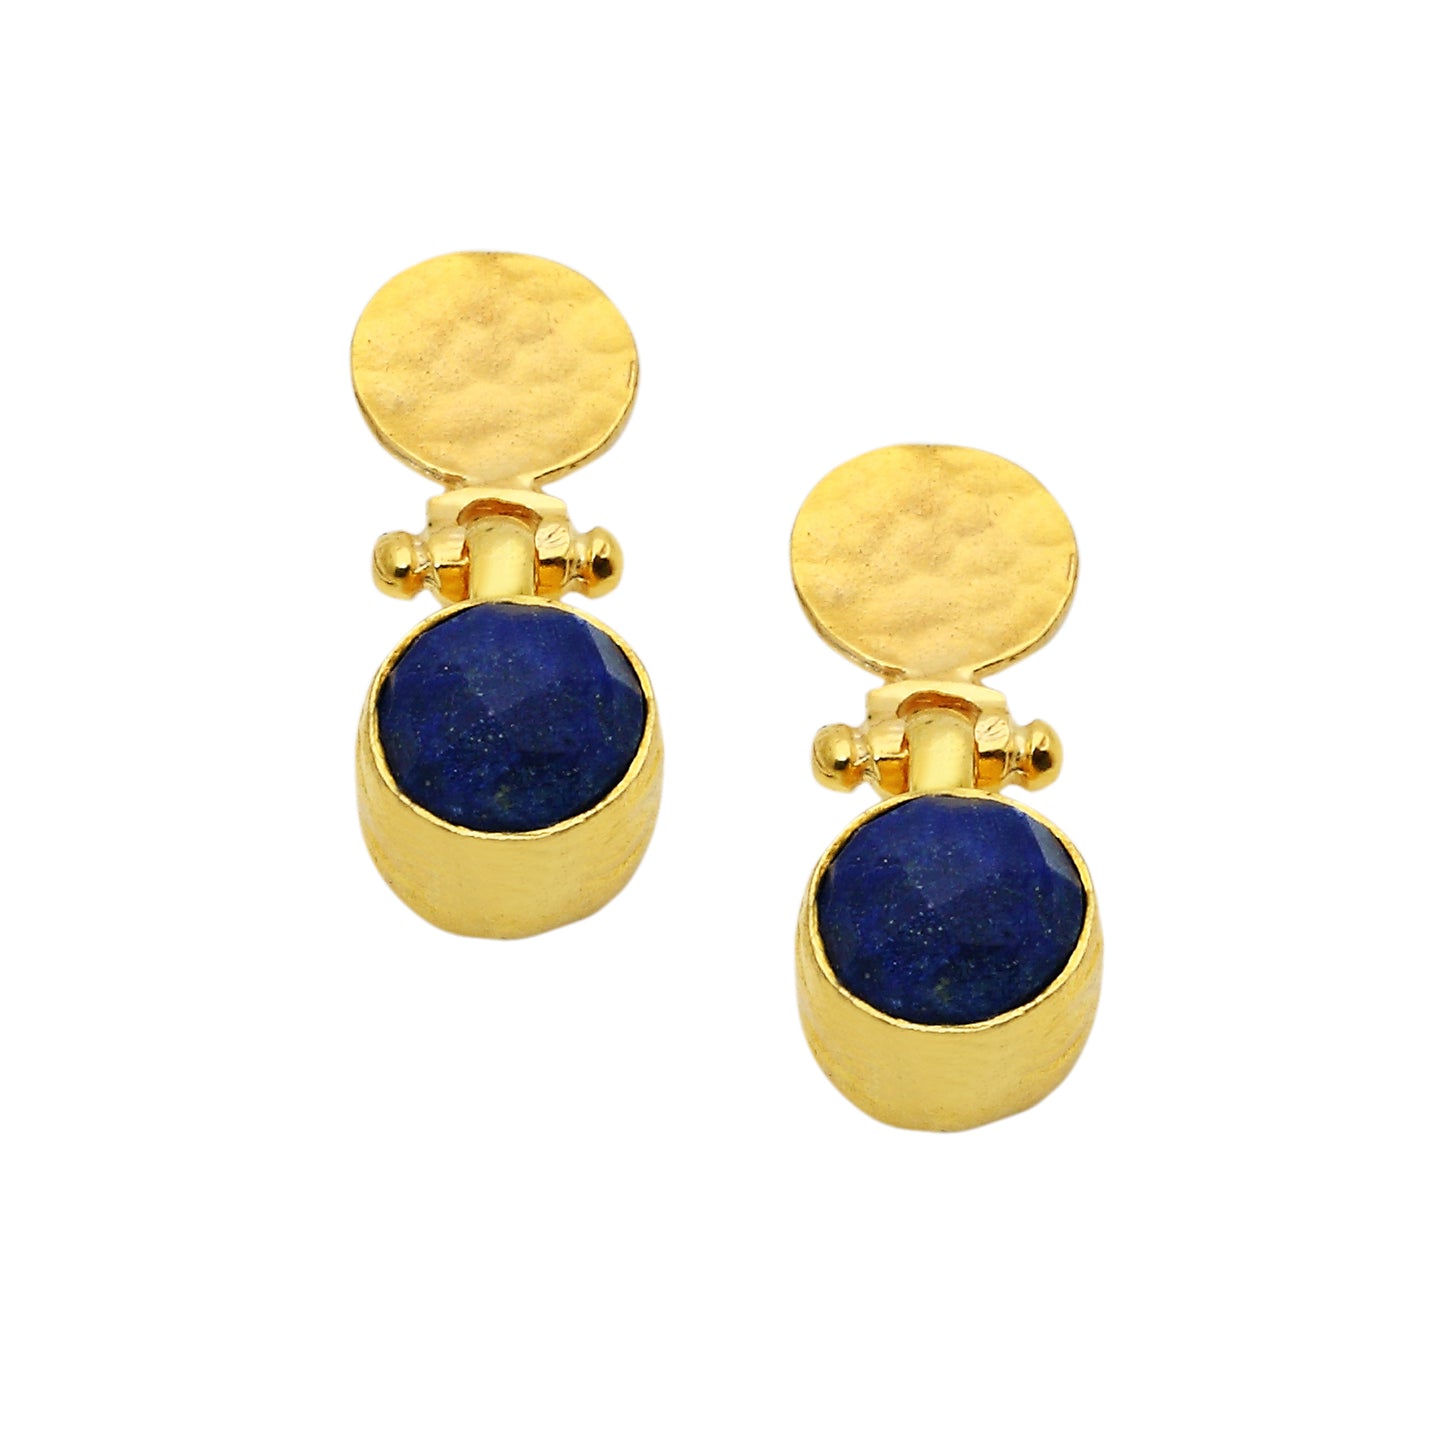 Lapis Earrings with Hammered Post